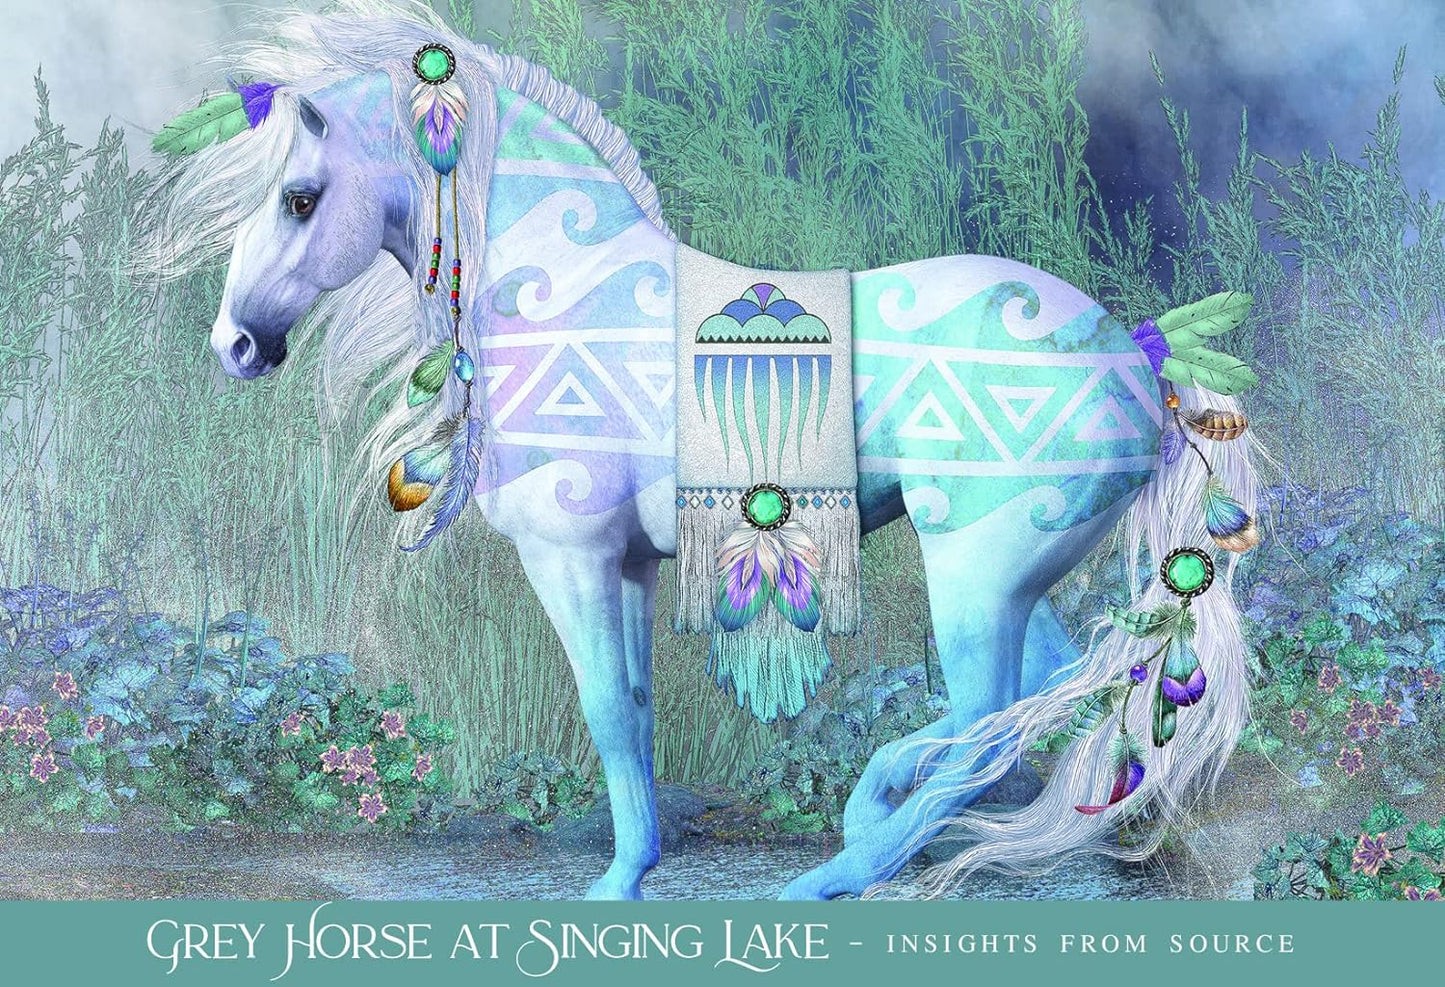 Oracle of the Sacred Horse